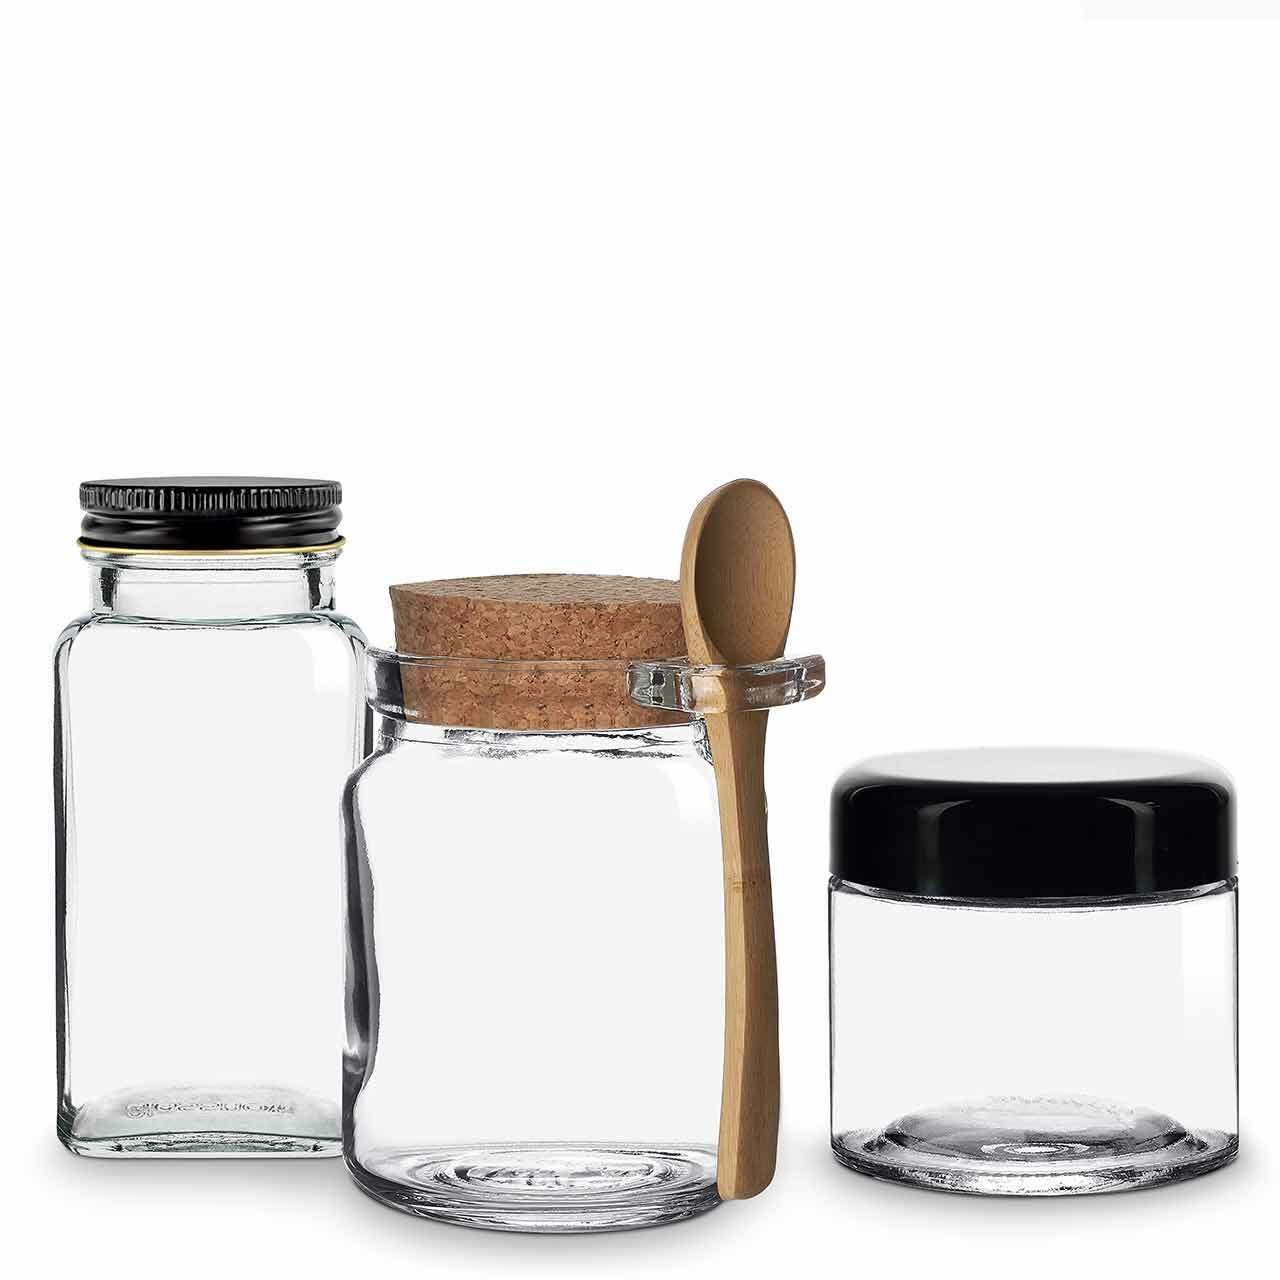 Glassnow Bath Salts and Scrubs Containers